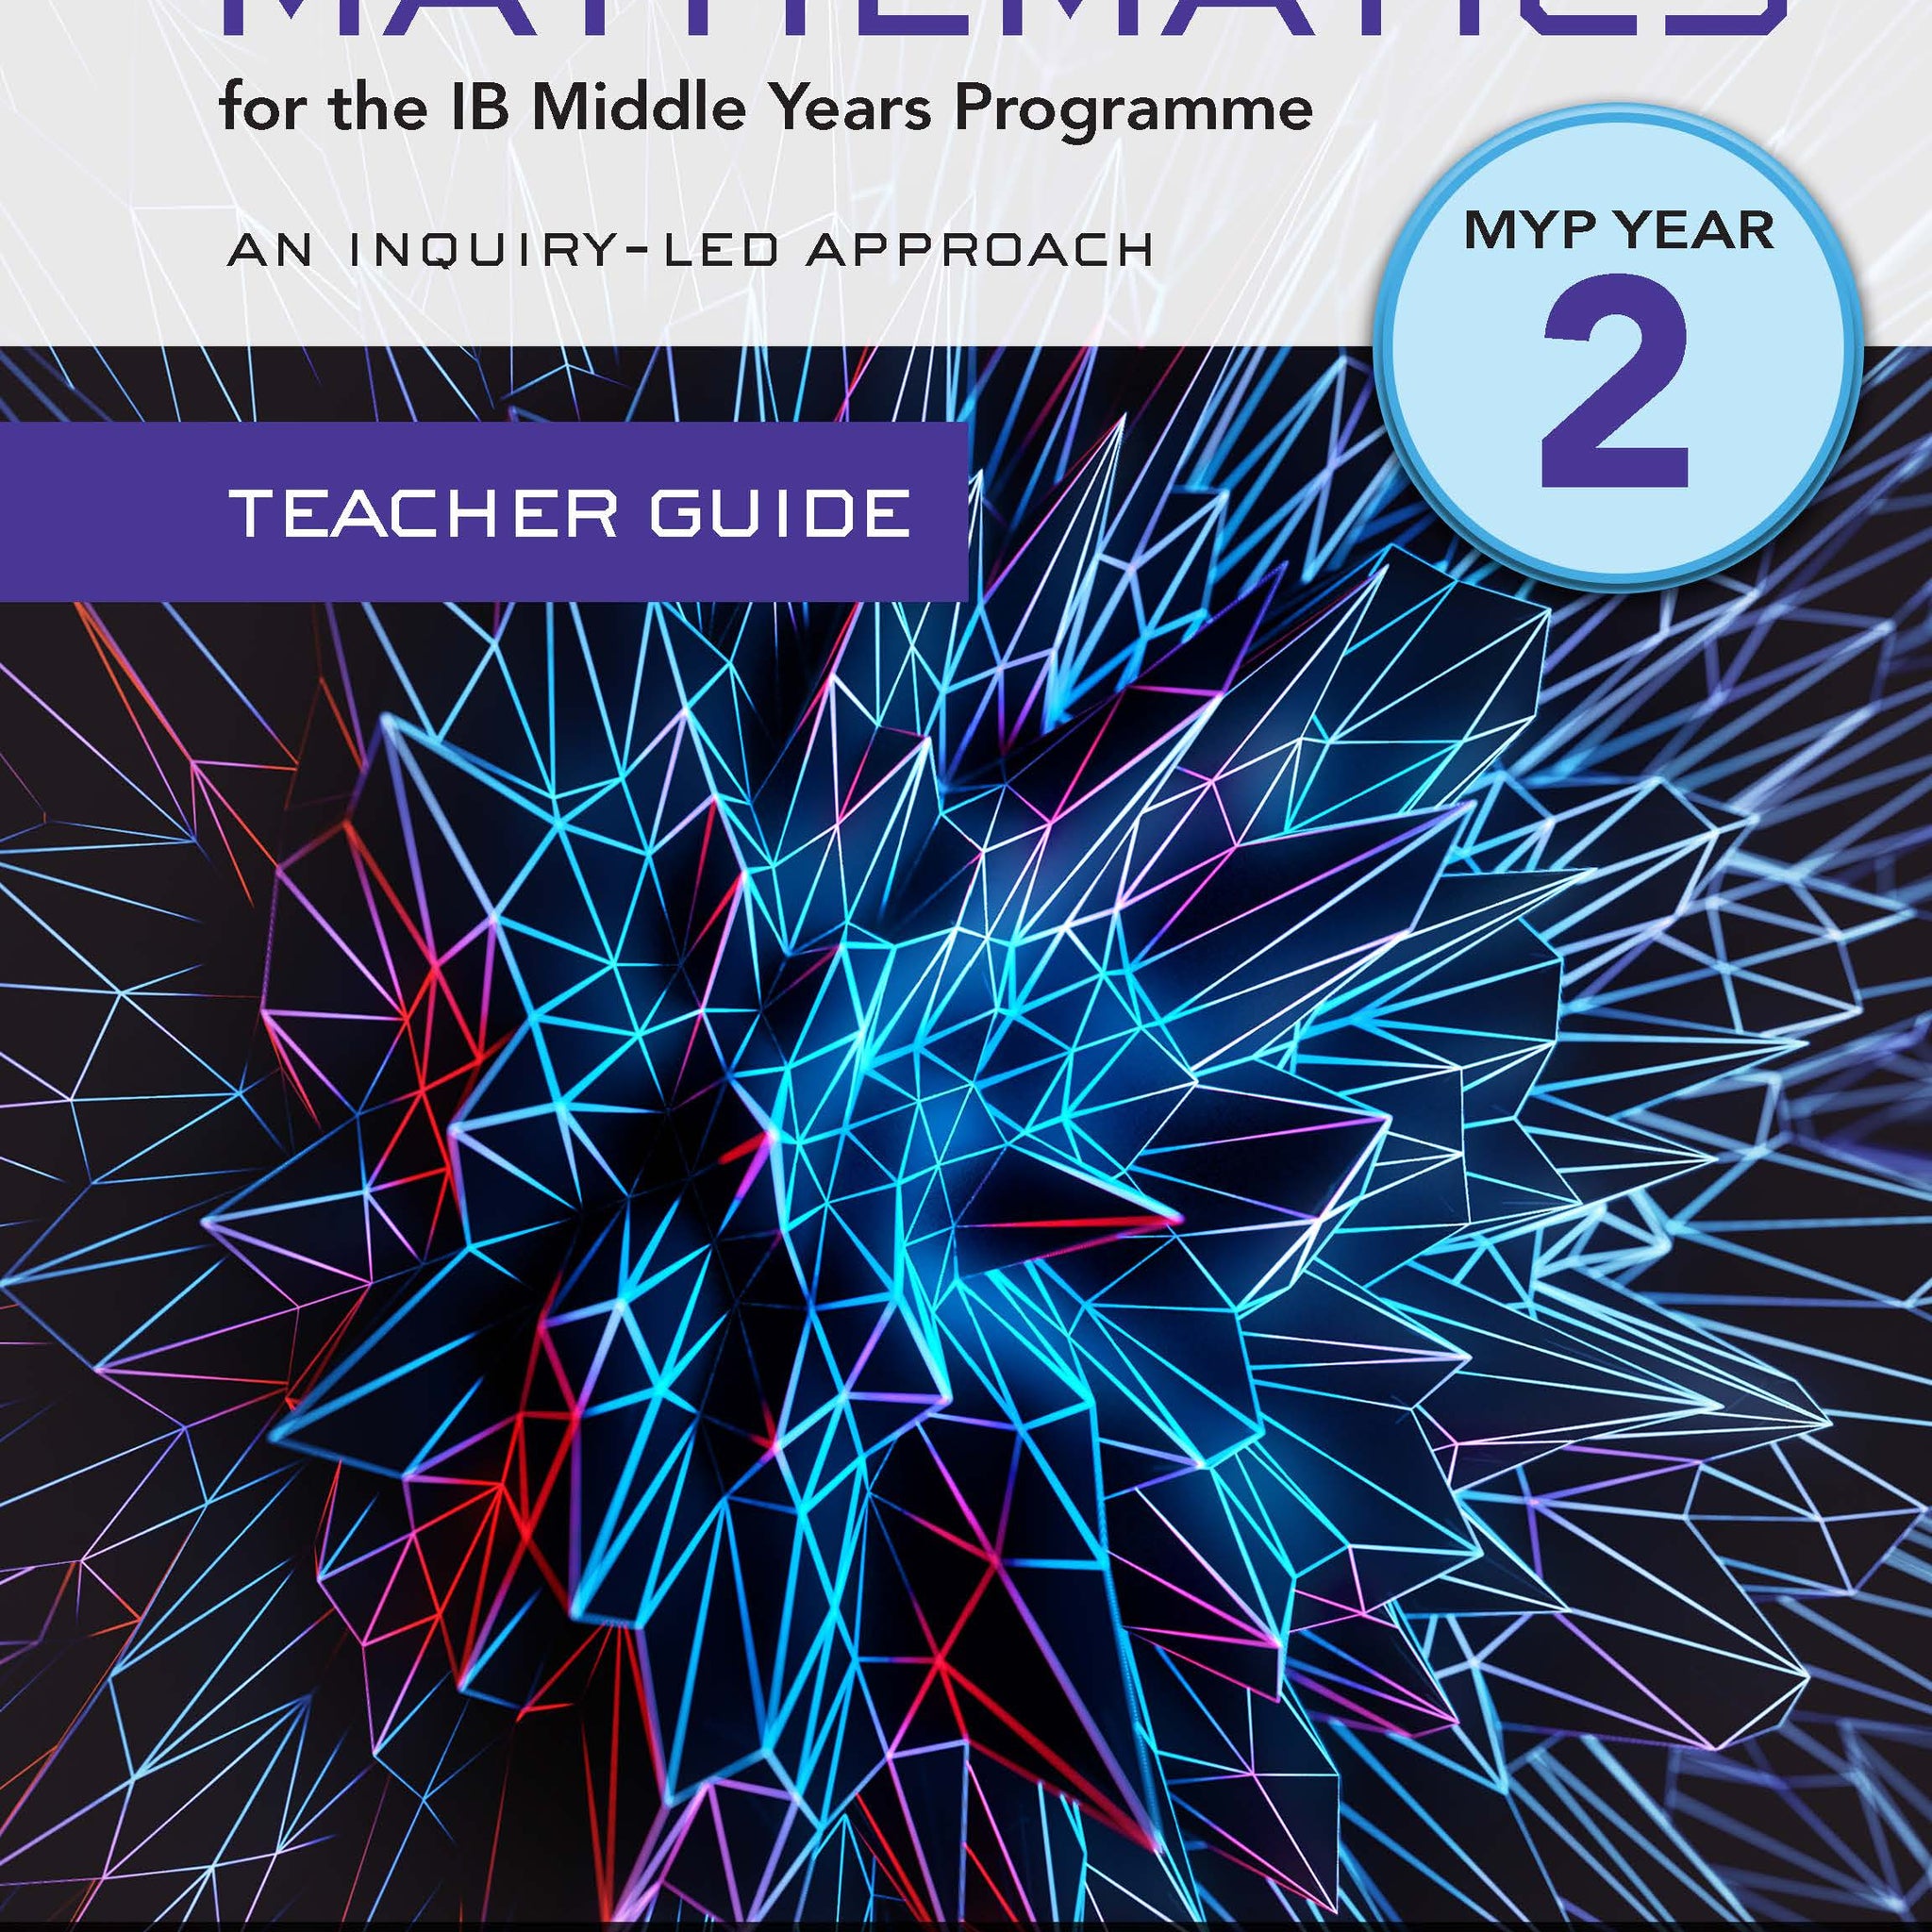 Pearson Mathematics for the IB Middle Years Programme Teacher Guide Year 2 (Digital Download)